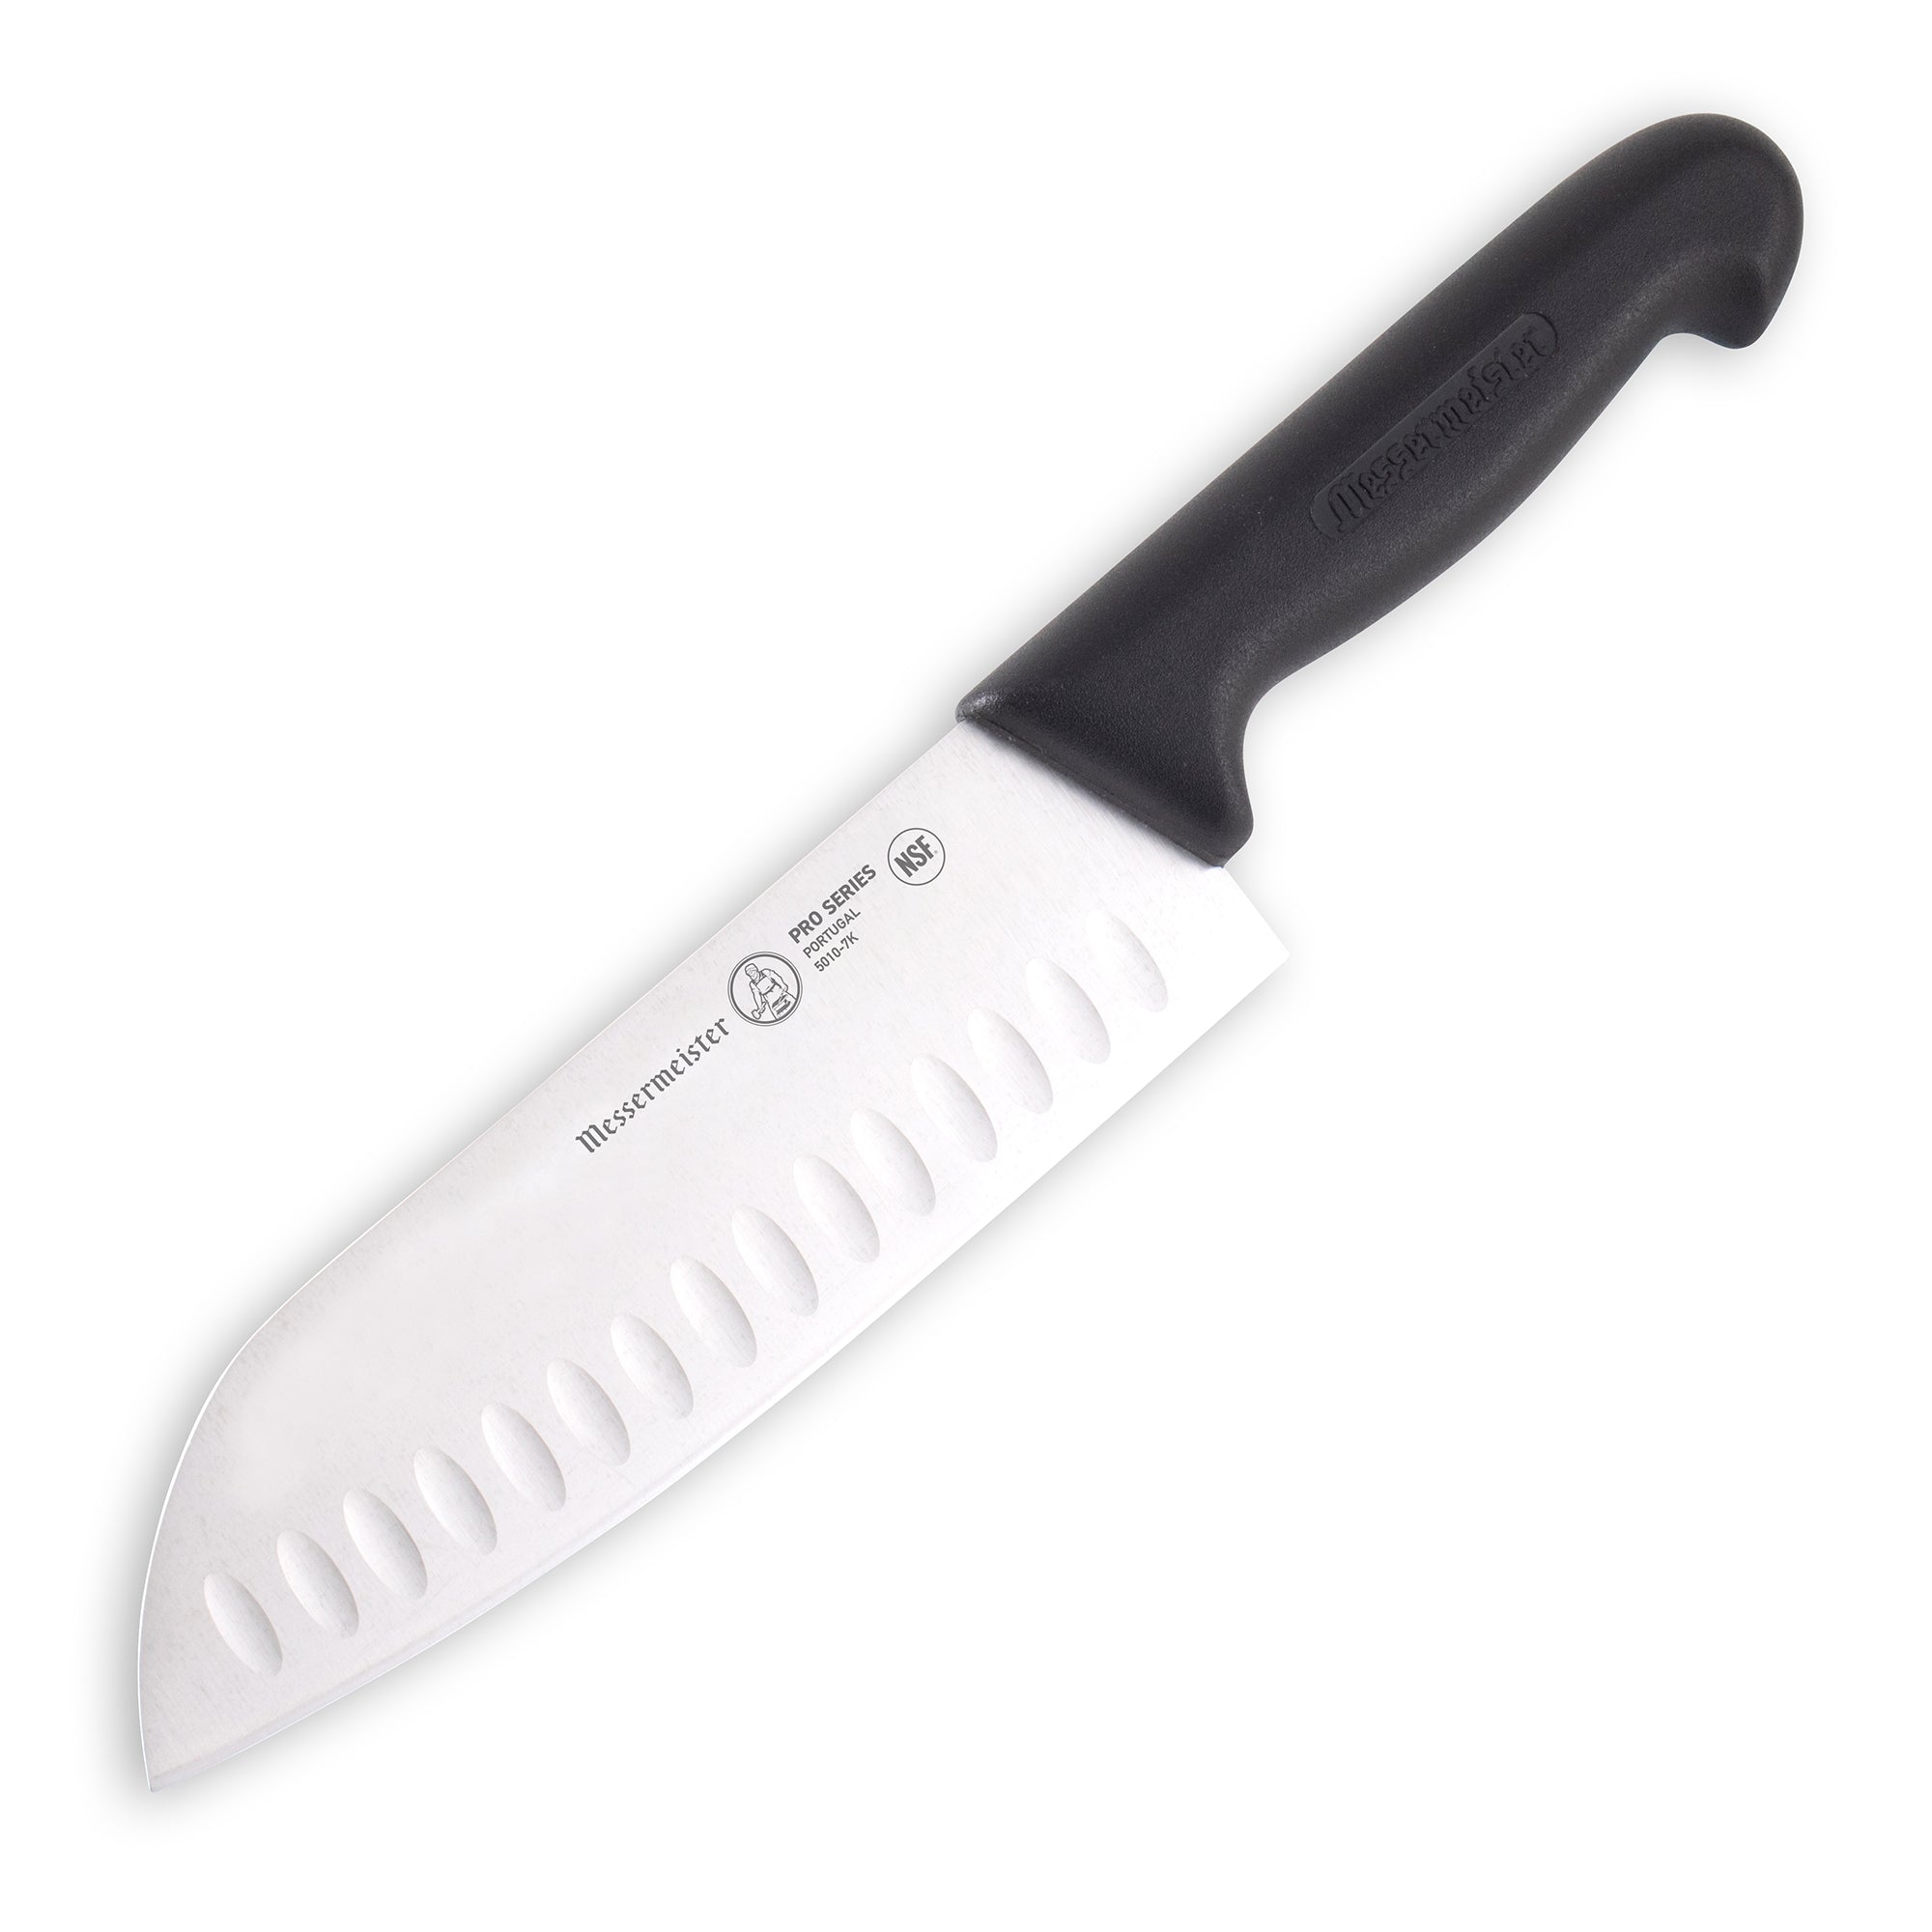 Pro Series 2.0 6 Chef Knife with Kullens, 1 count - Kroger